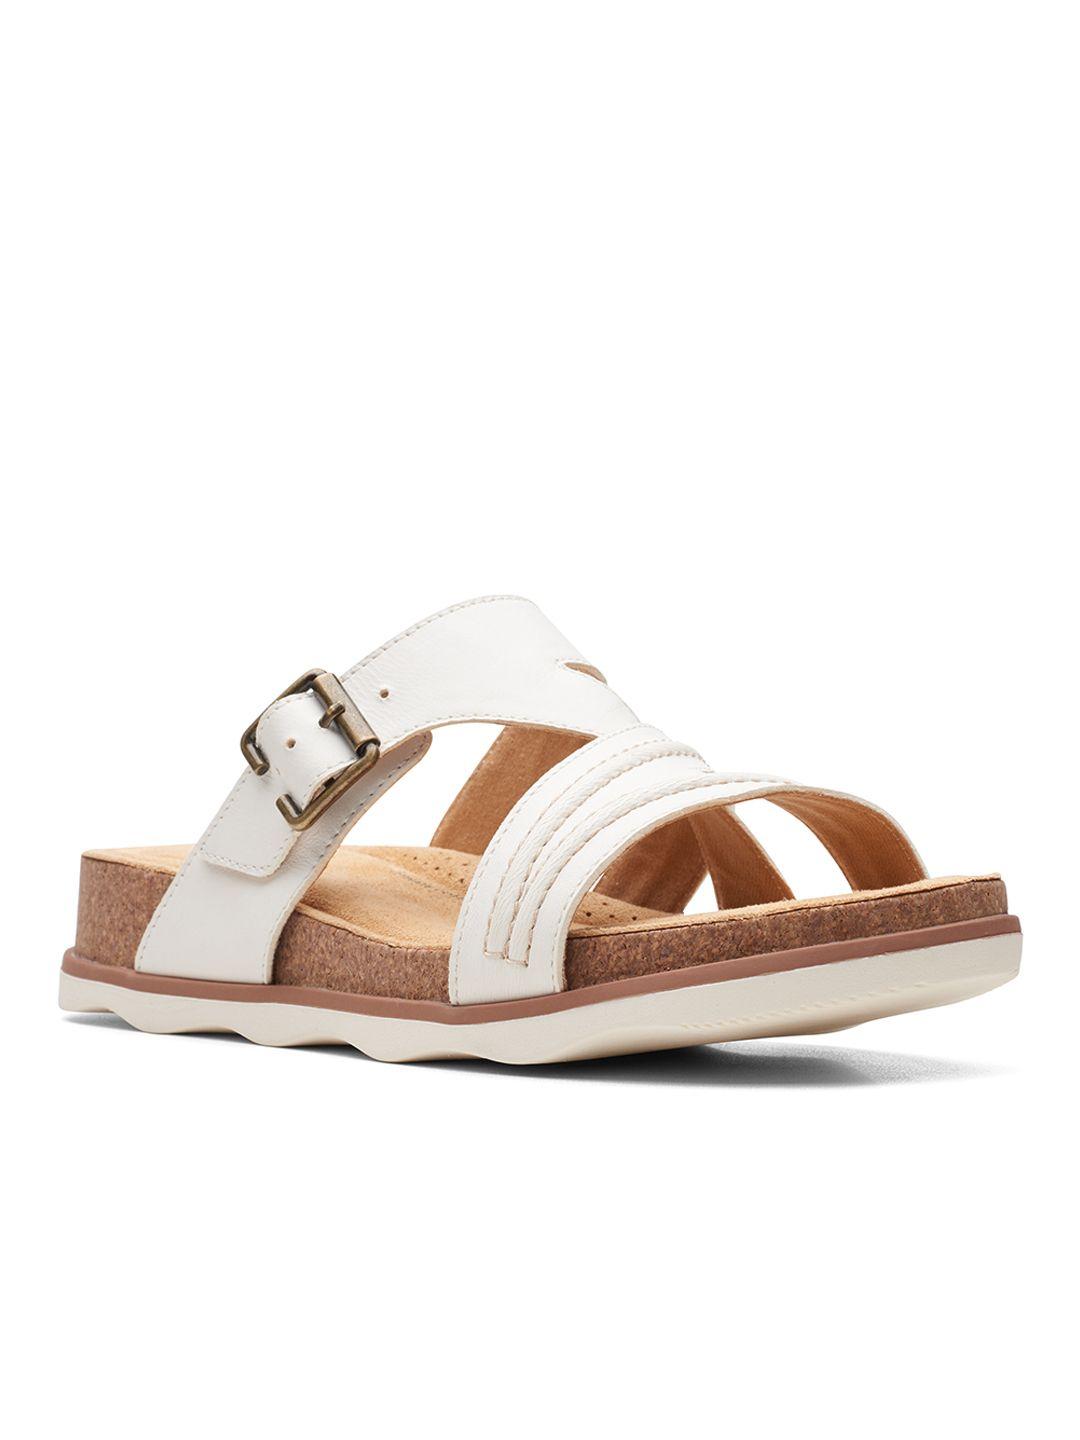 clarks women white leather comfort sandals